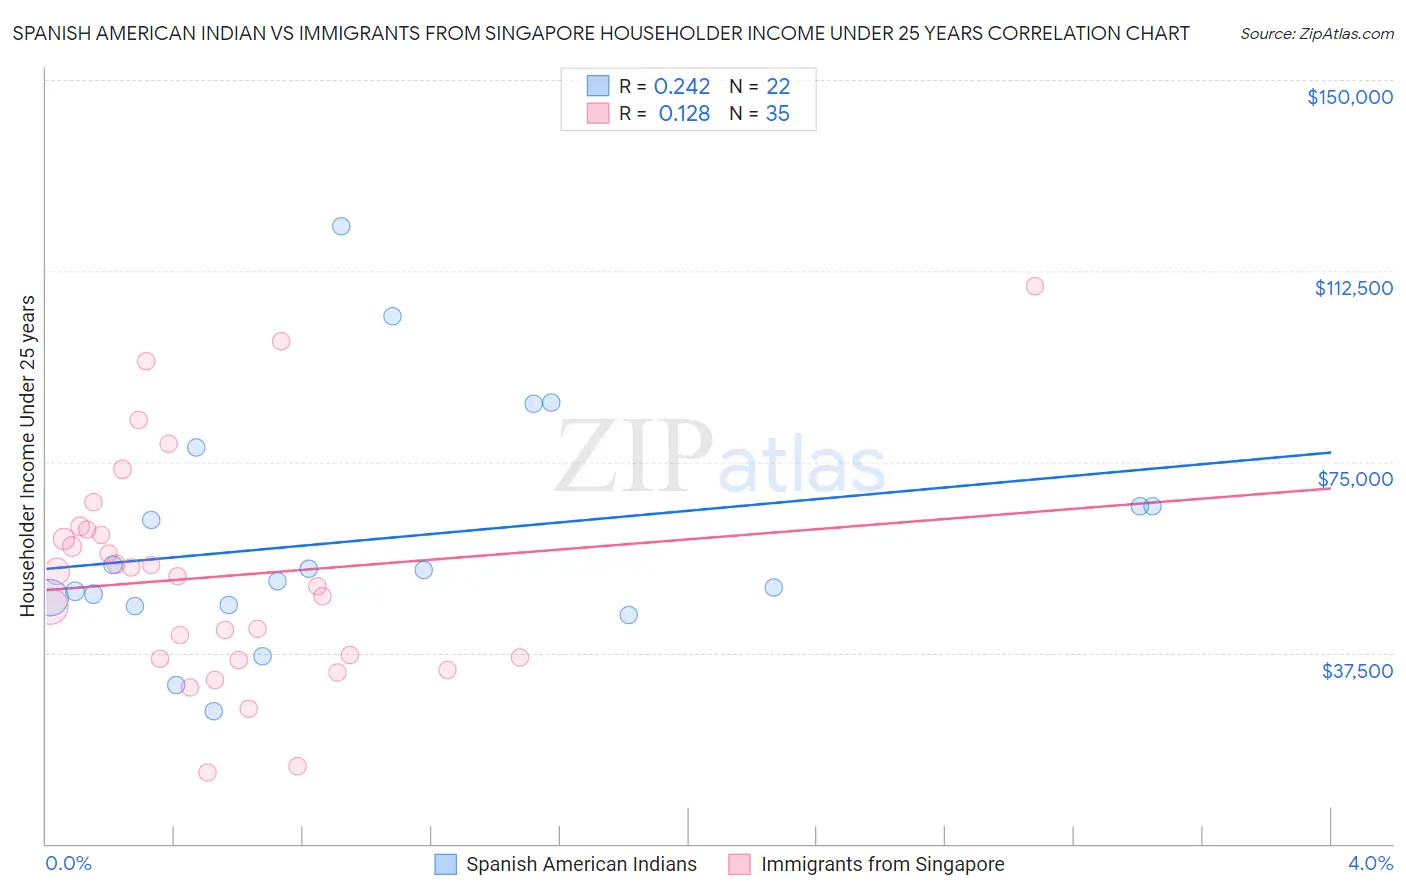 Spanish American Indian vs Immigrants from Singapore Householder Income Under 25 years